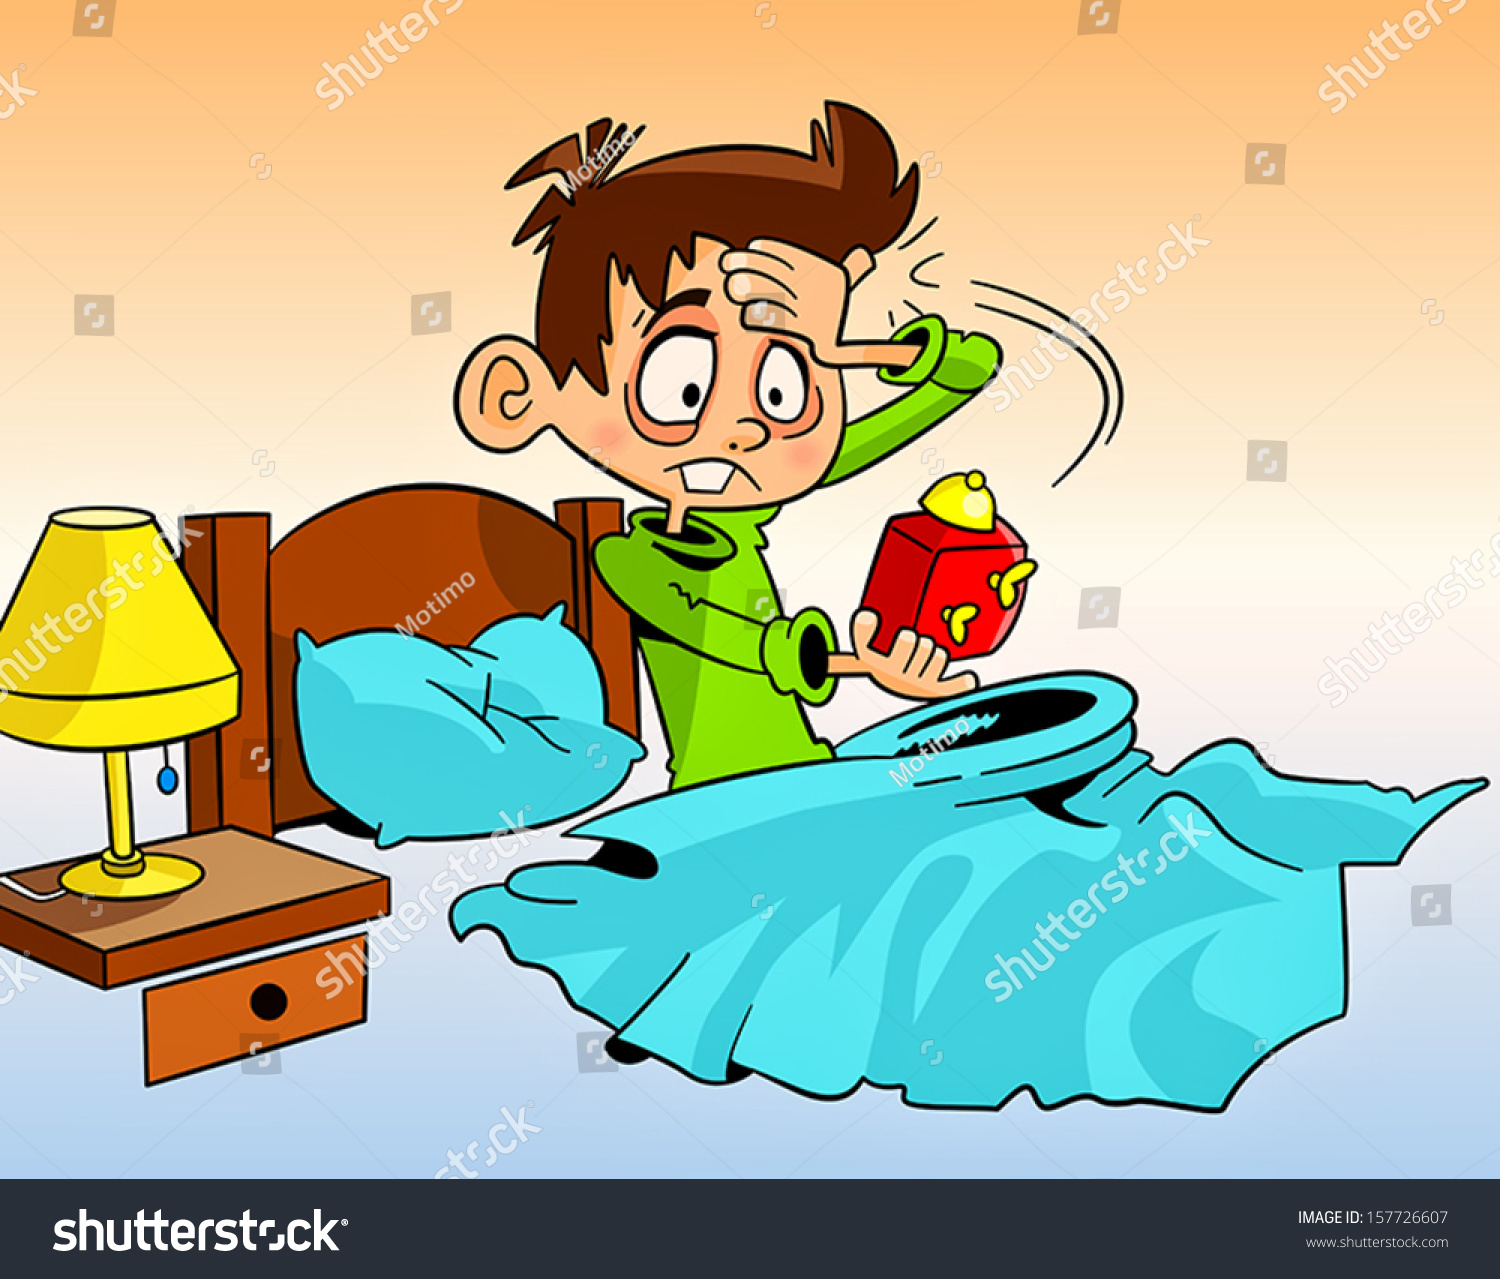 clipart of girl waking up - photo #29